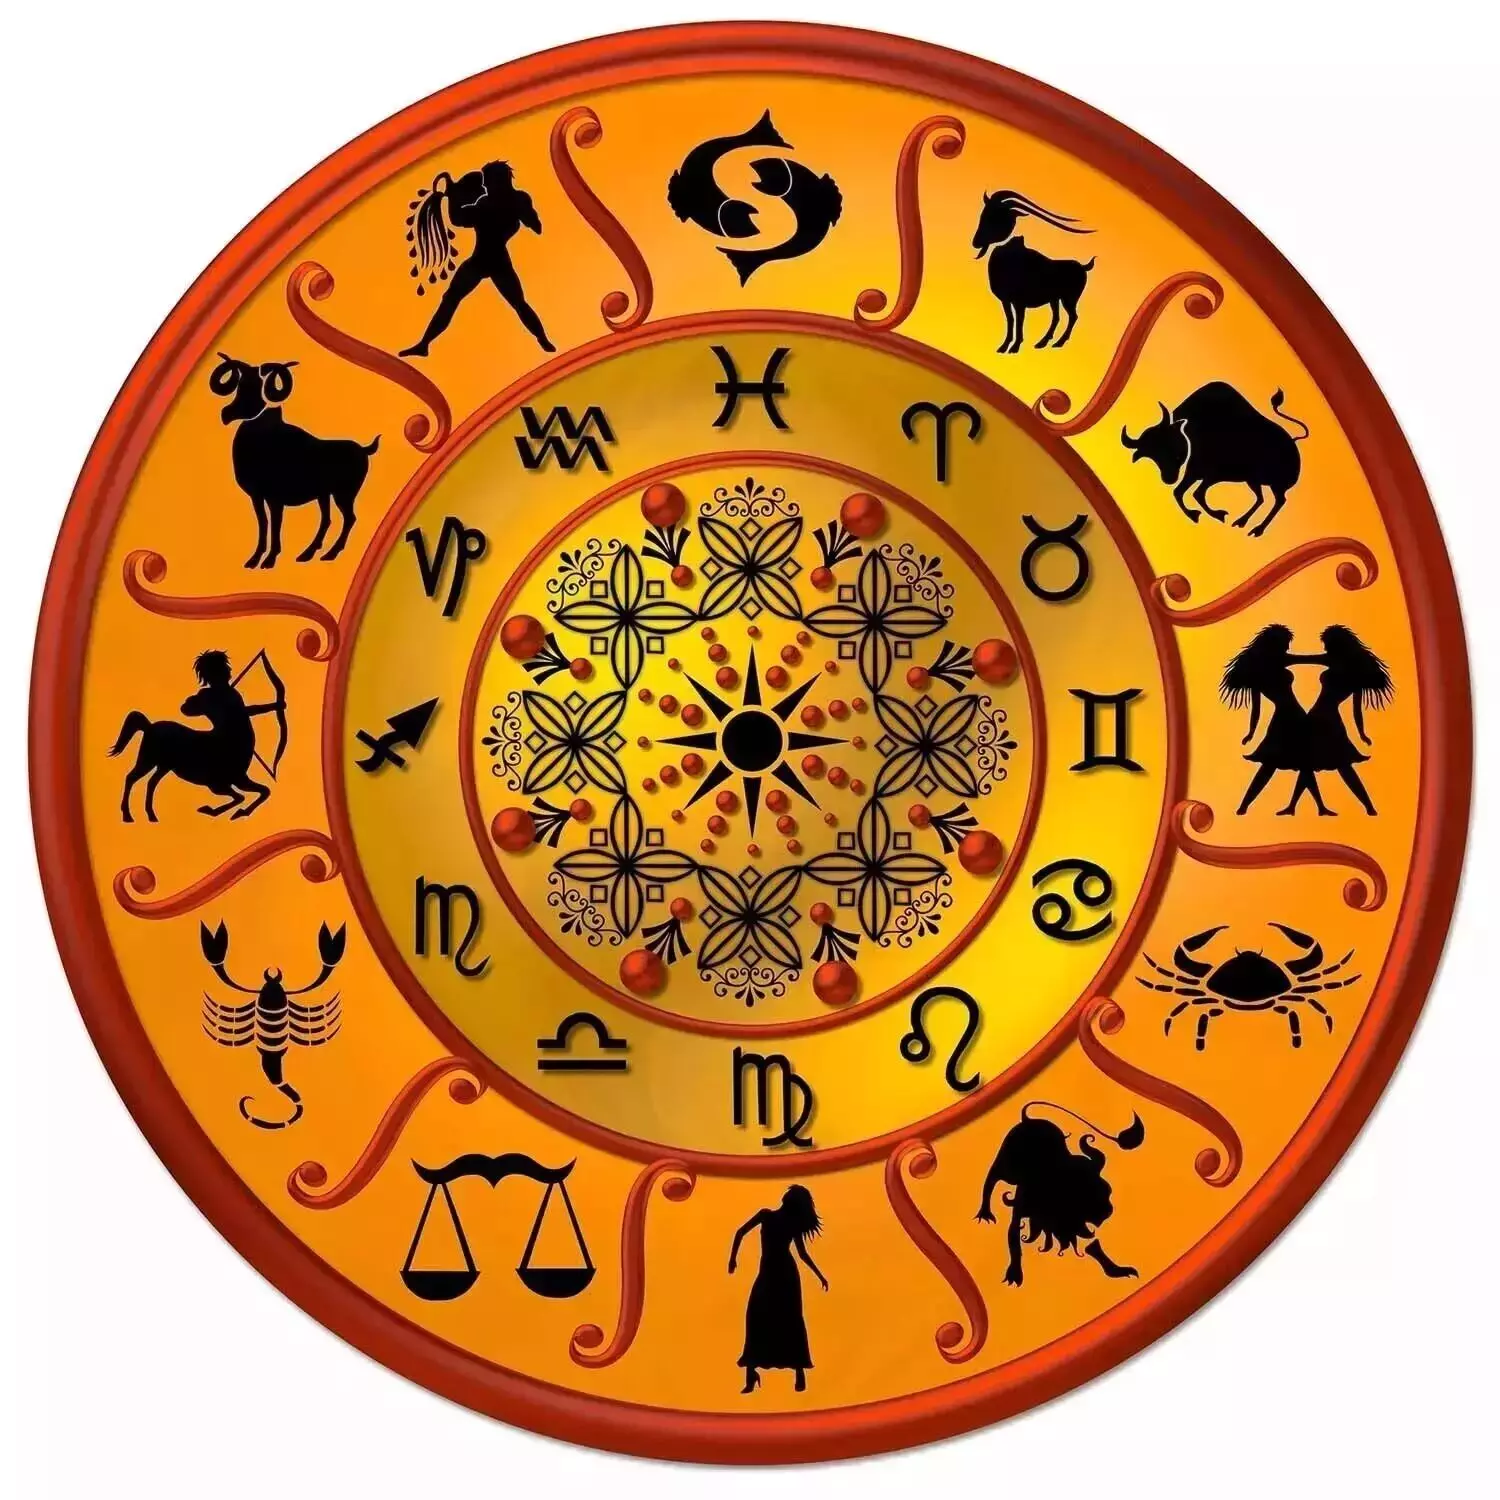 03 March  – Know your todays horoscope